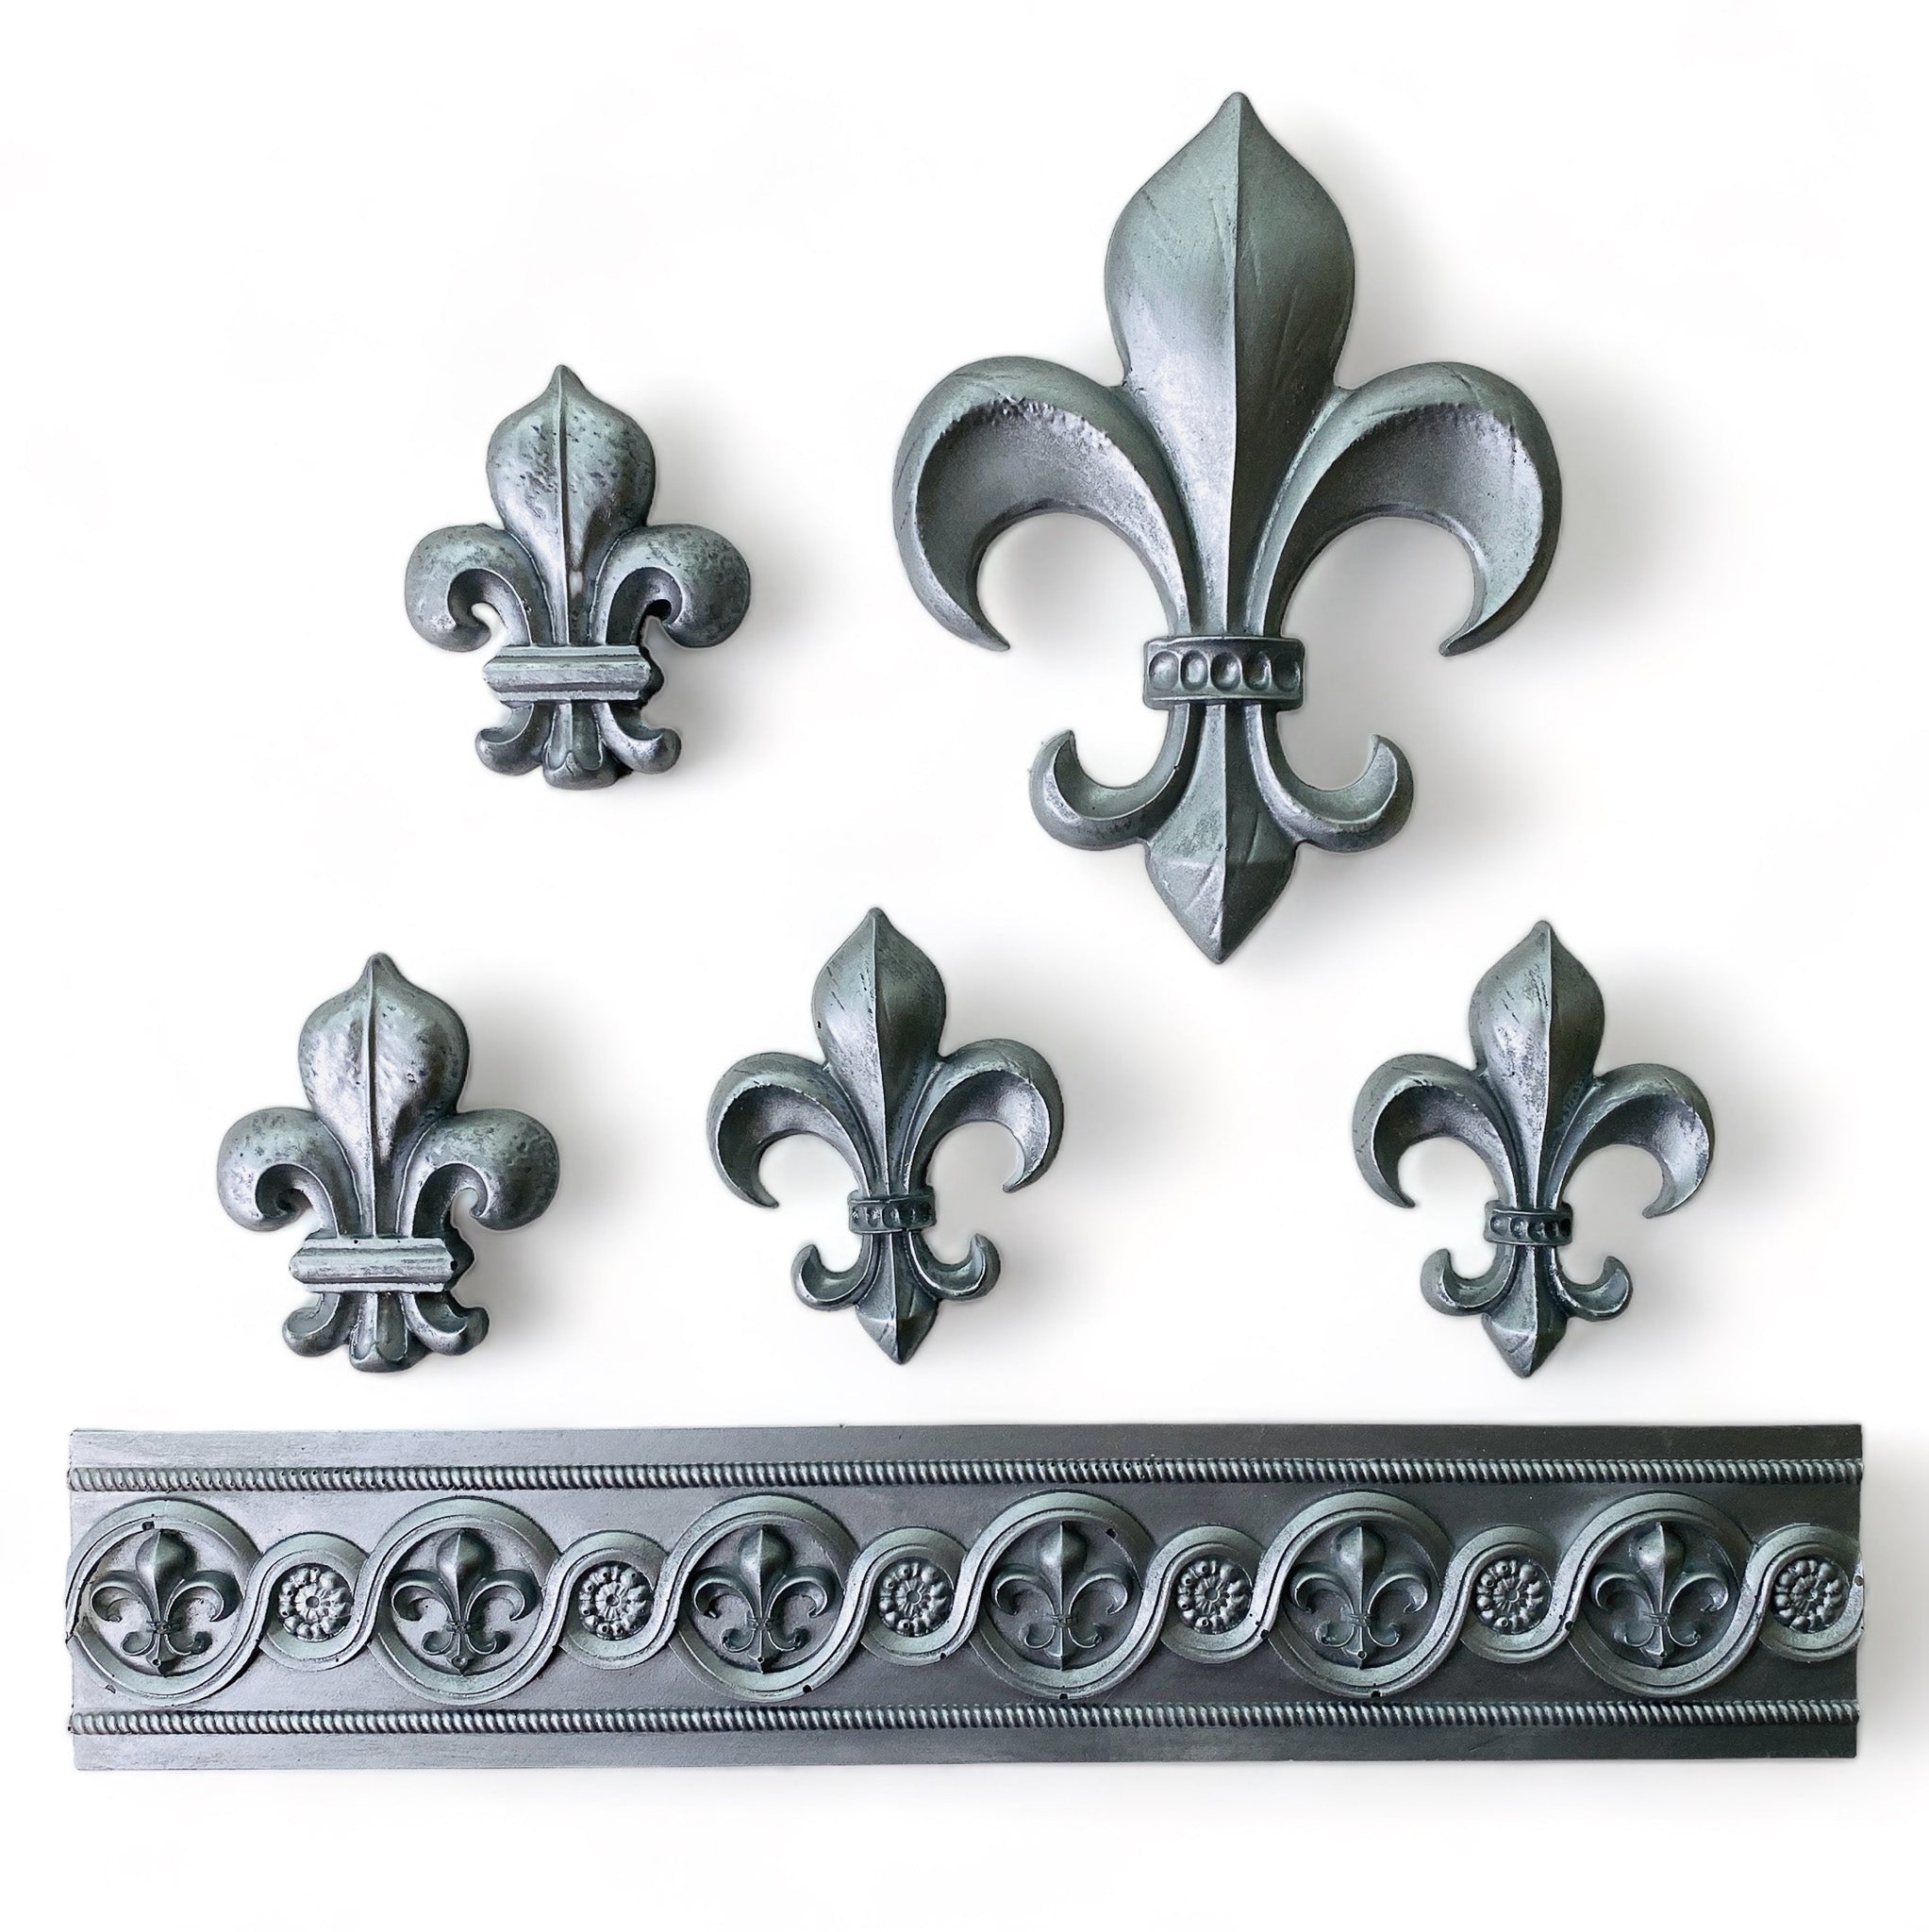 Silver colored silicone mould castings from ReDesign with Prima's Fleur De Lis En Or  silicone mould are against a white background.